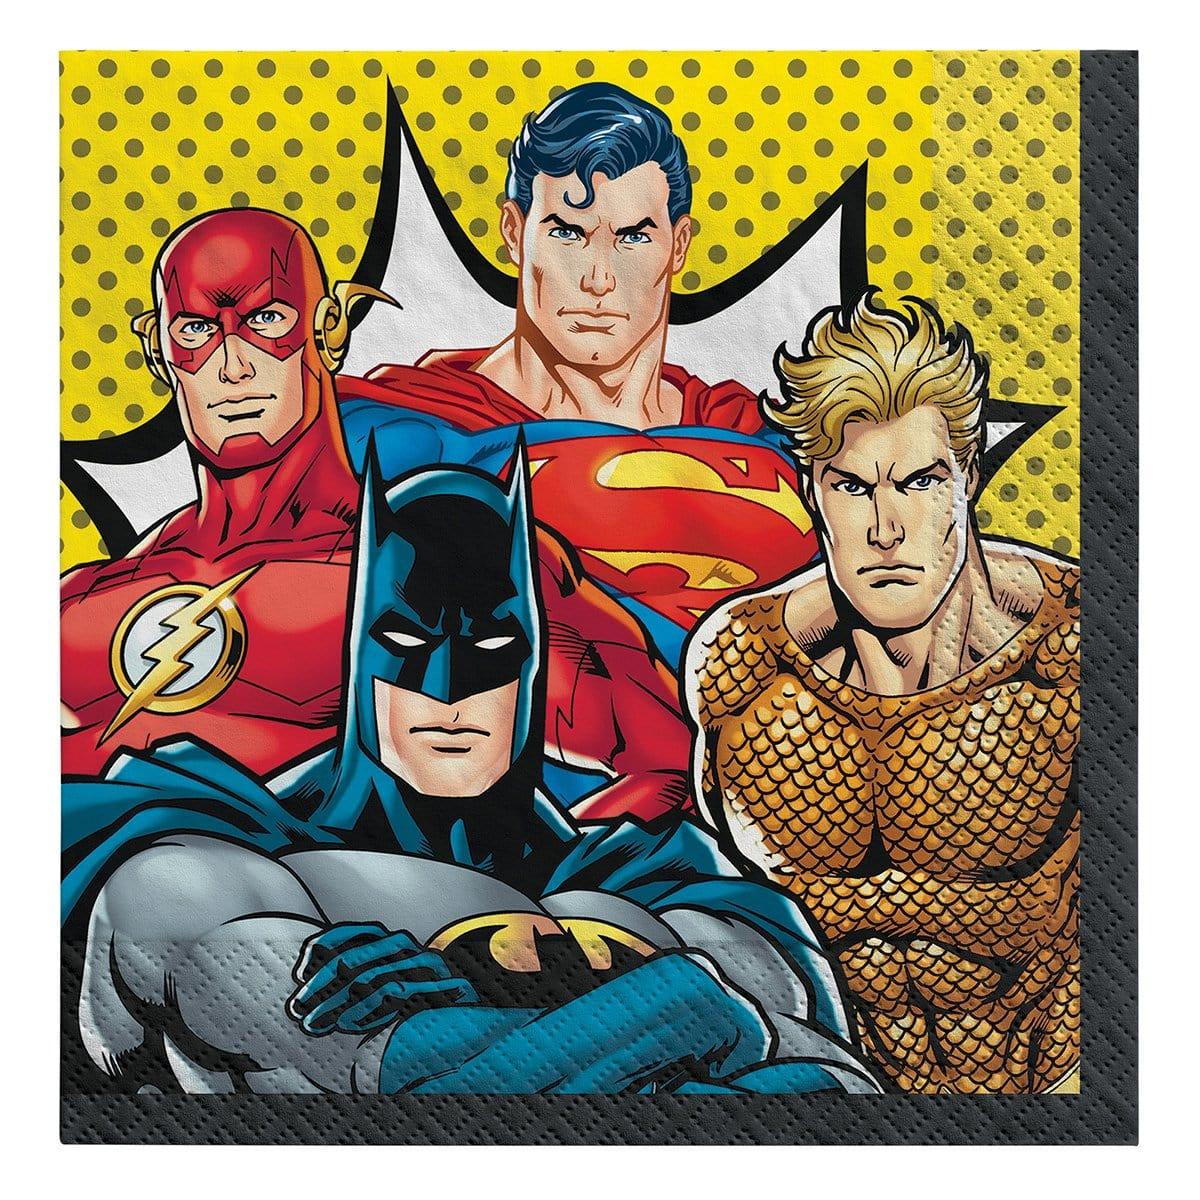 Buy Kids Birthday Justice League lunch napkins, 16 per package sold at Party Expert